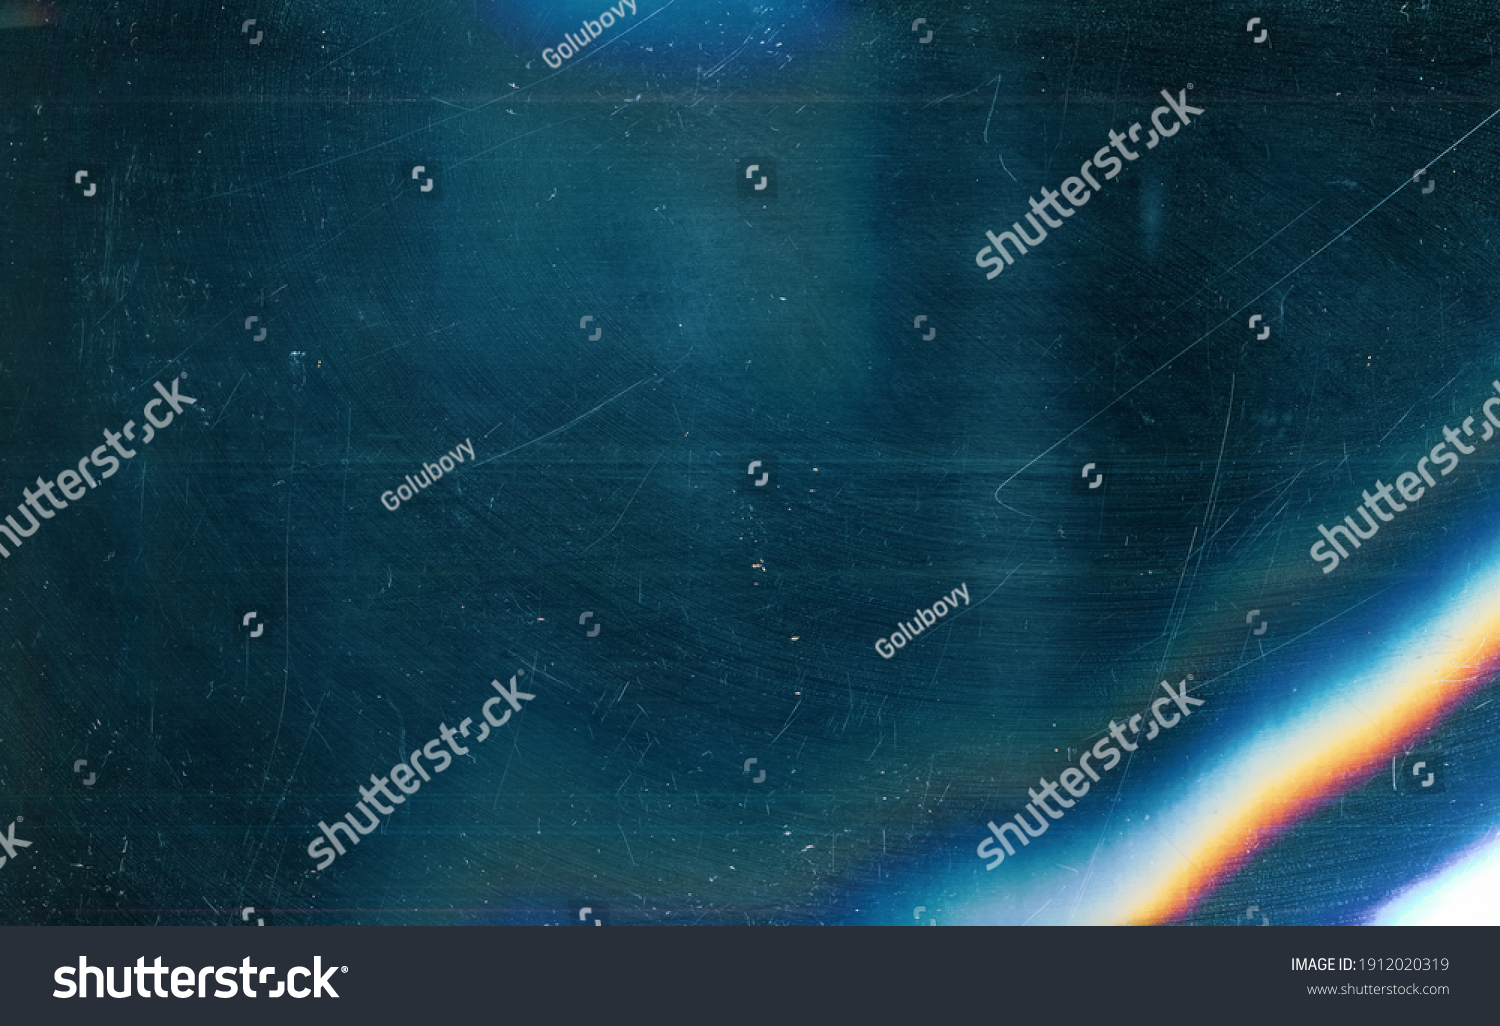 Dust scratches overlay. Old film effect. Blue distressed faded glass with smeared dirt stains colorful rainbow lens flare design. #1912020319